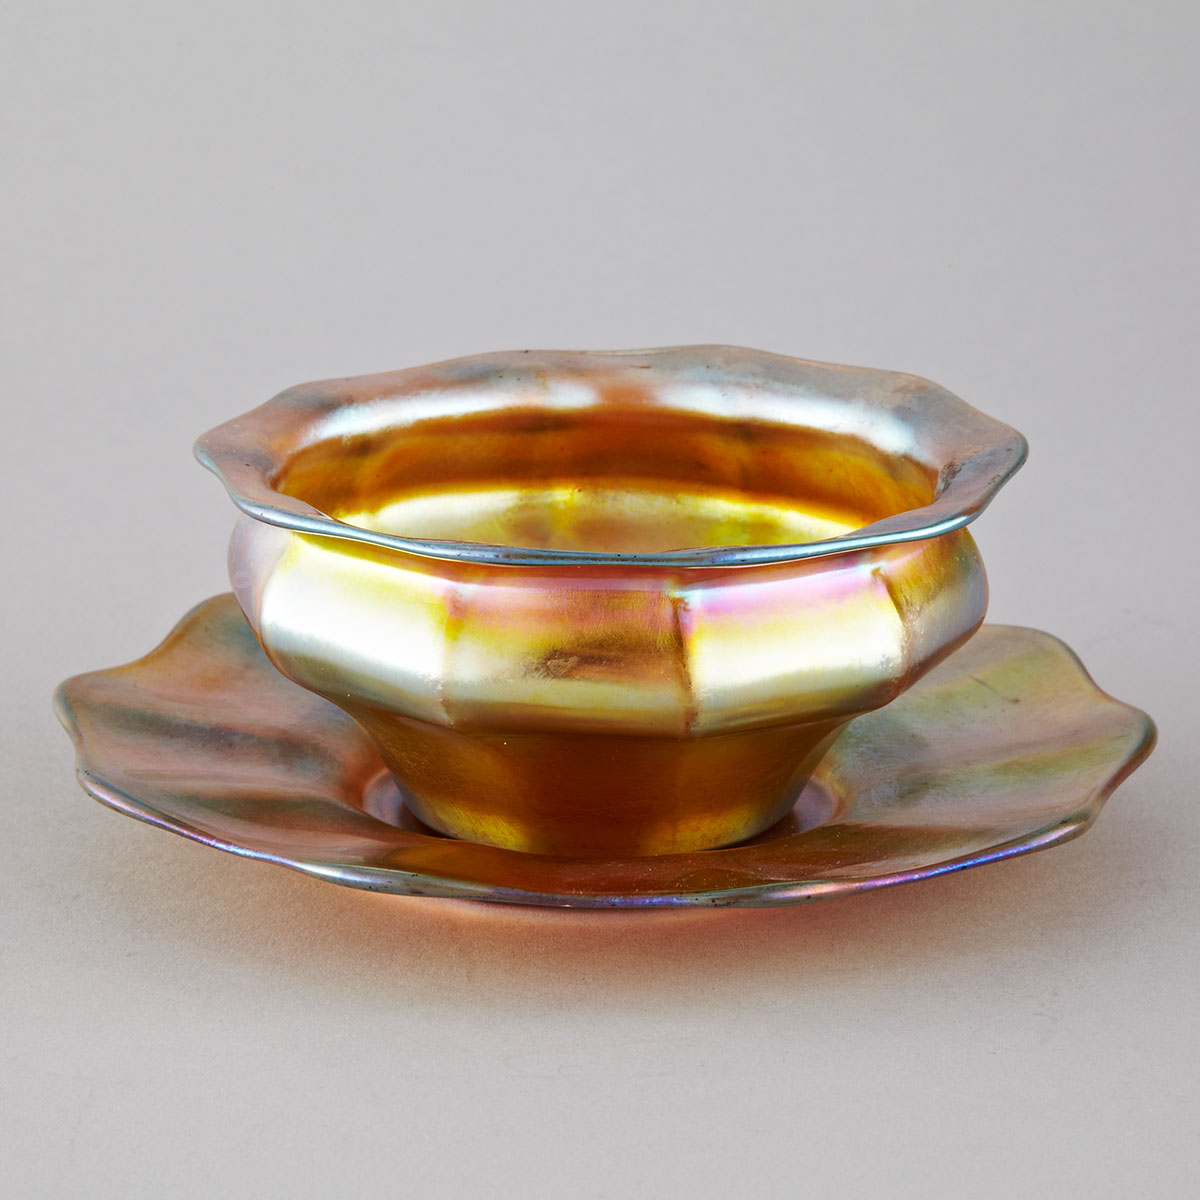 Tiffany ‘Favrile’ Iridescent Glass Bowl and Stand, early 20th century